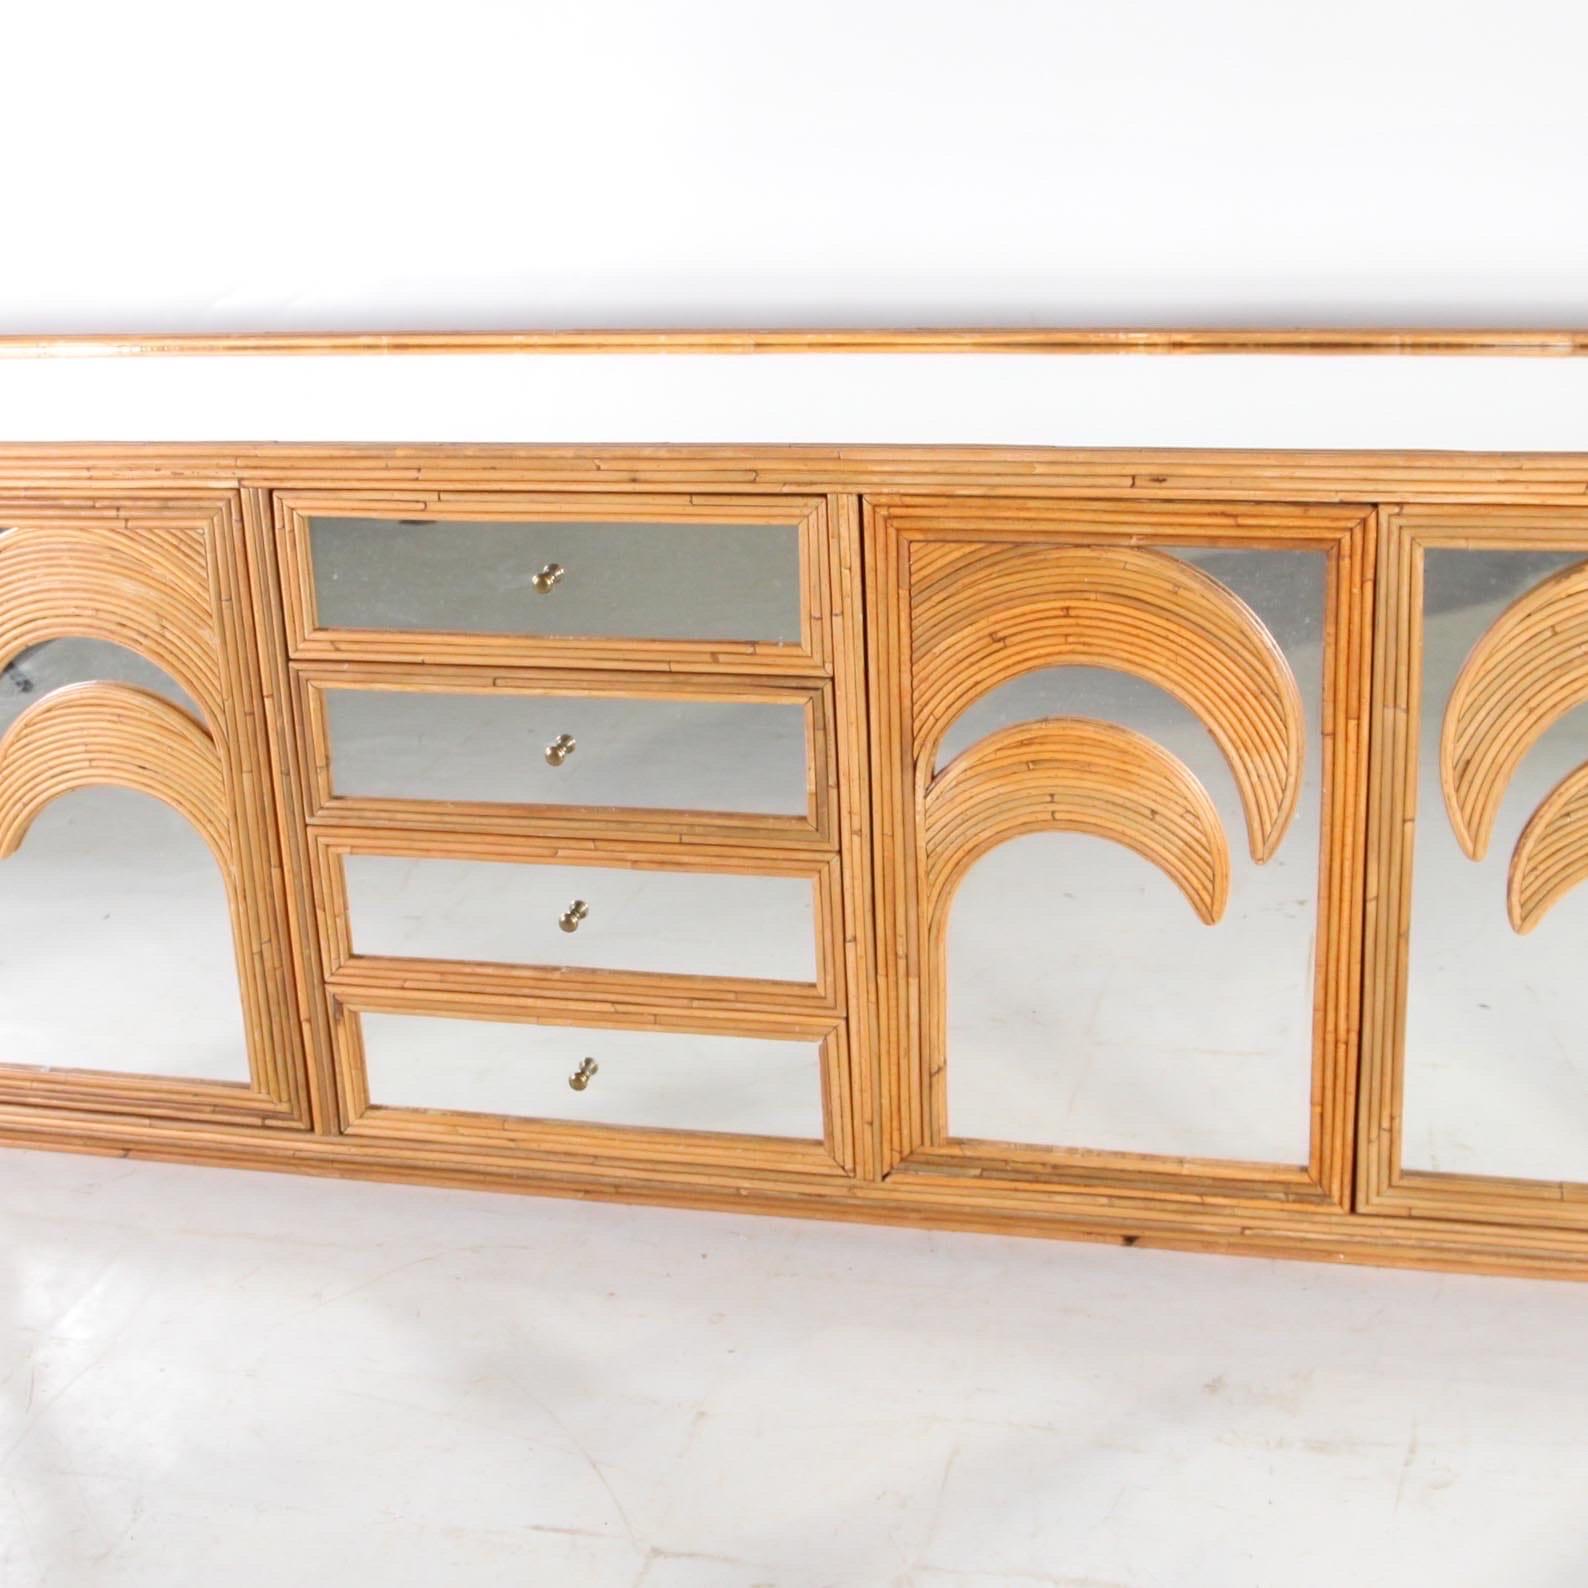 Beautiful large rattan and mirrored sideboard/credenza with palmtrees patterns.  Simple and chic unique design typical of the seventies. High quality of craftsmanship, entirely hand made. Excellent condition.